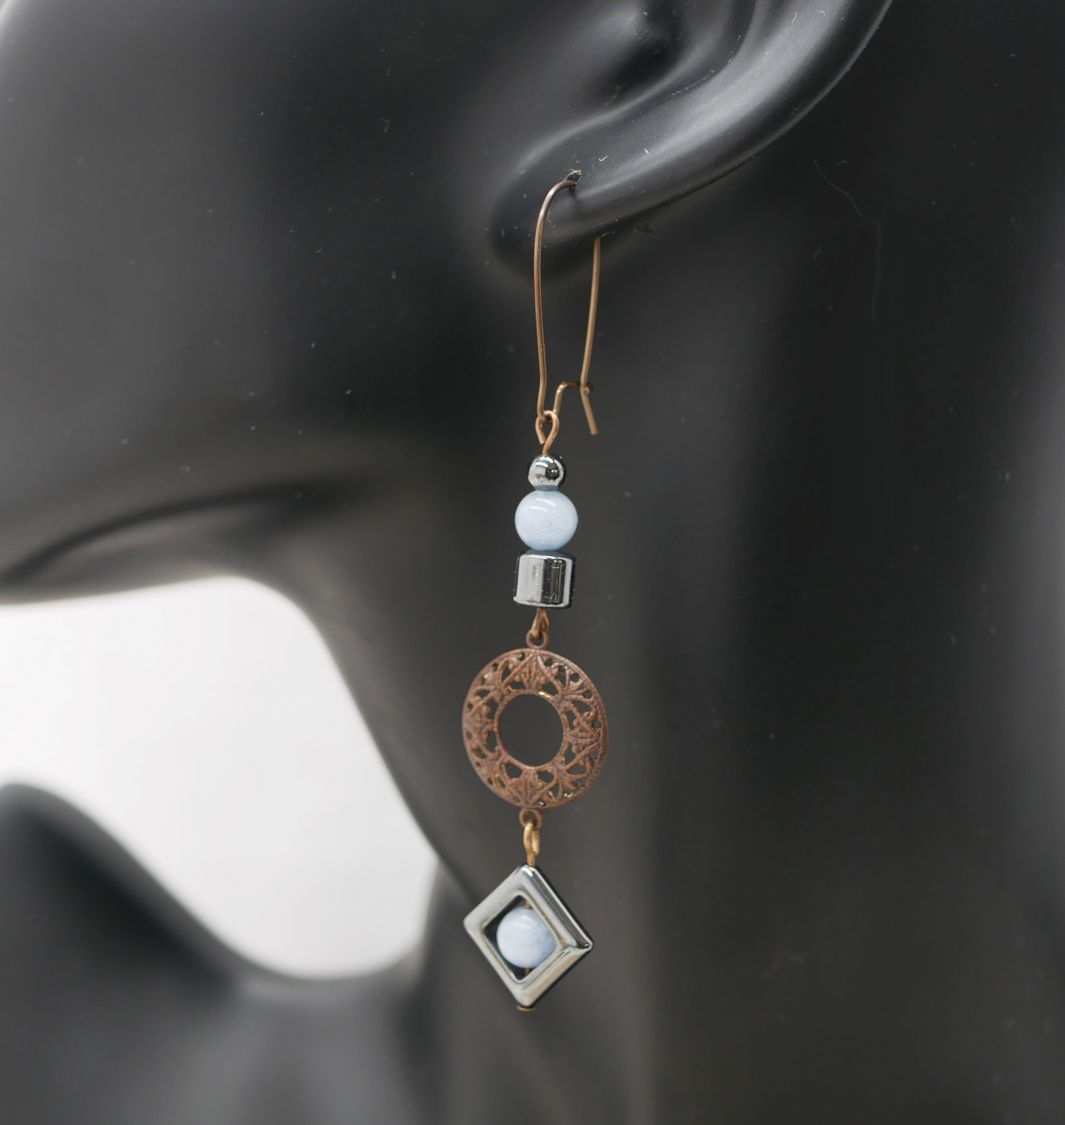 Asymmetrical earrings in natural brass and hematite beads